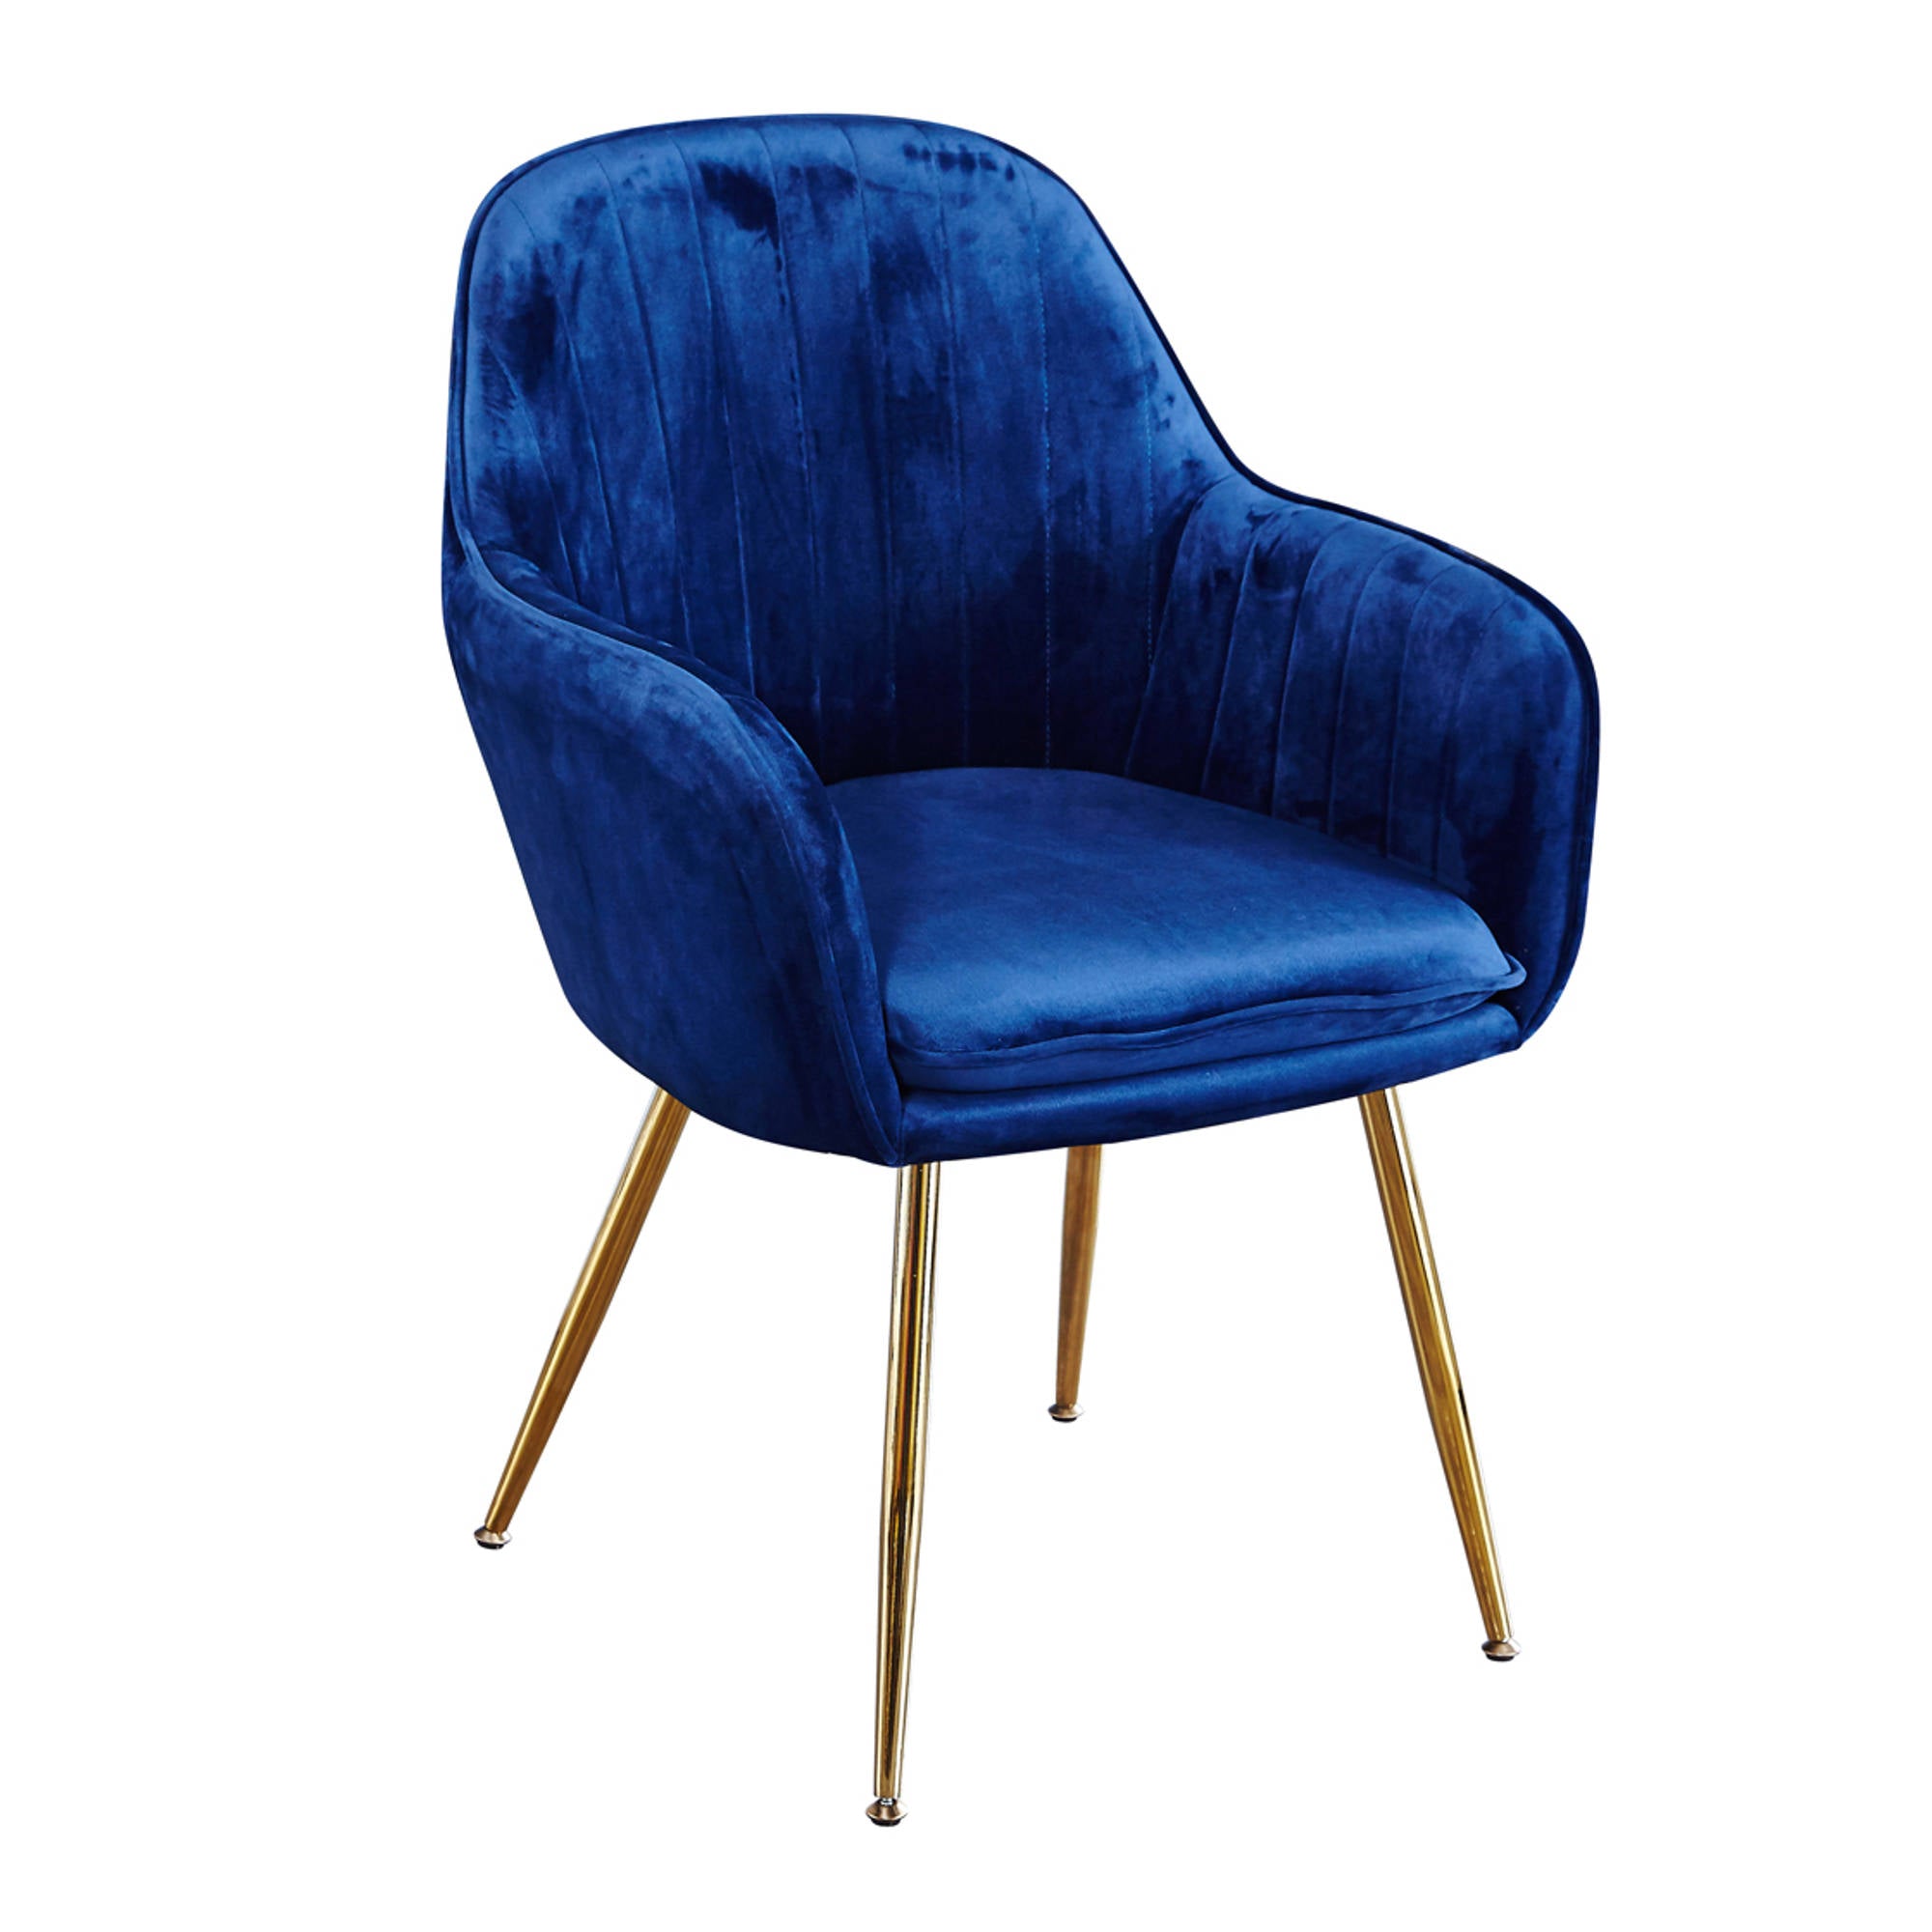 Lares Chair in Royal Blue - Ezzo